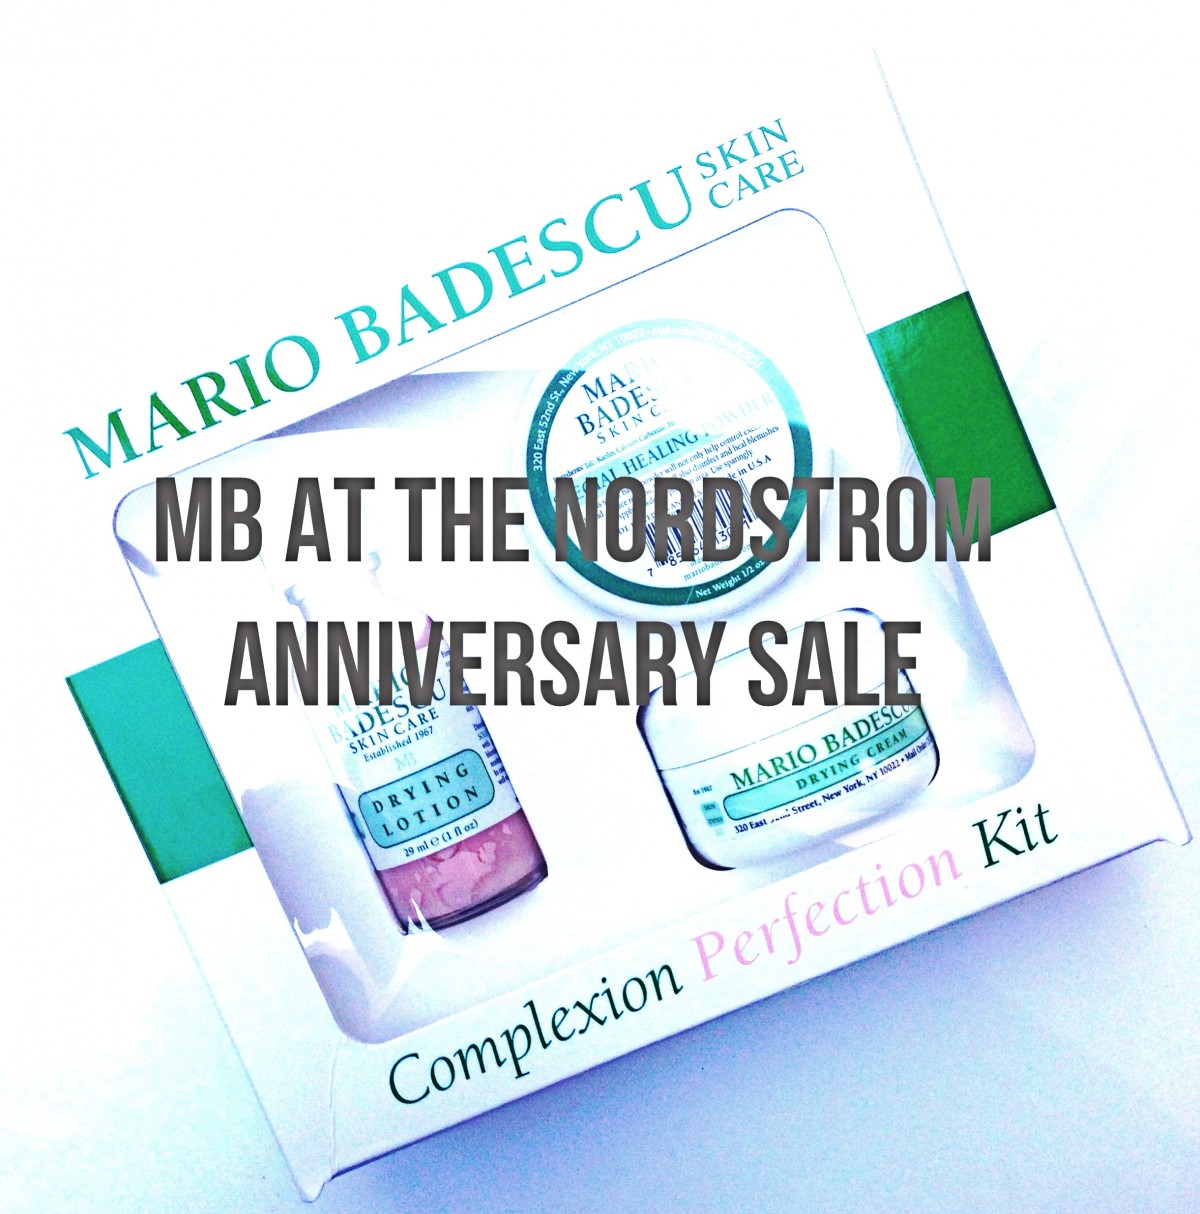 Mario Badescu At The Nordstrom Anniversary Sale